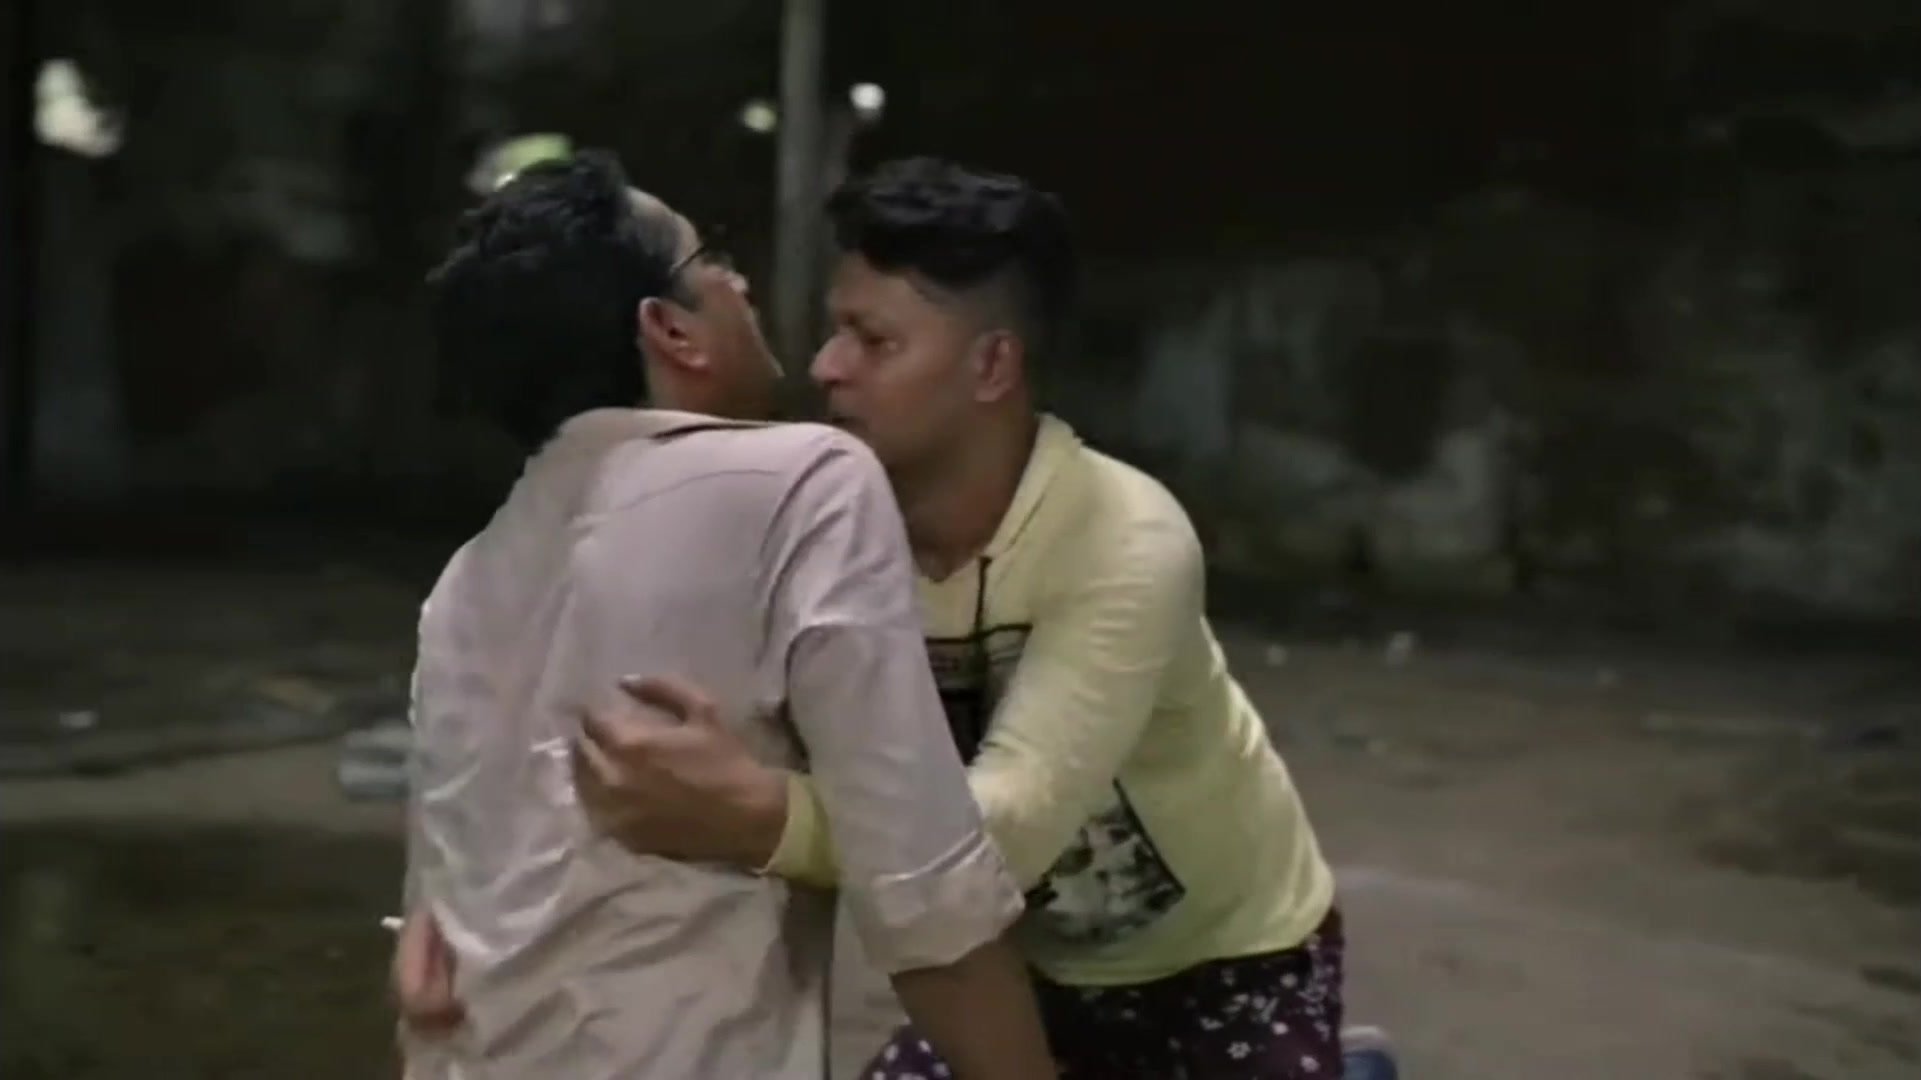 Gay kissing scene from a Bengal movie photo